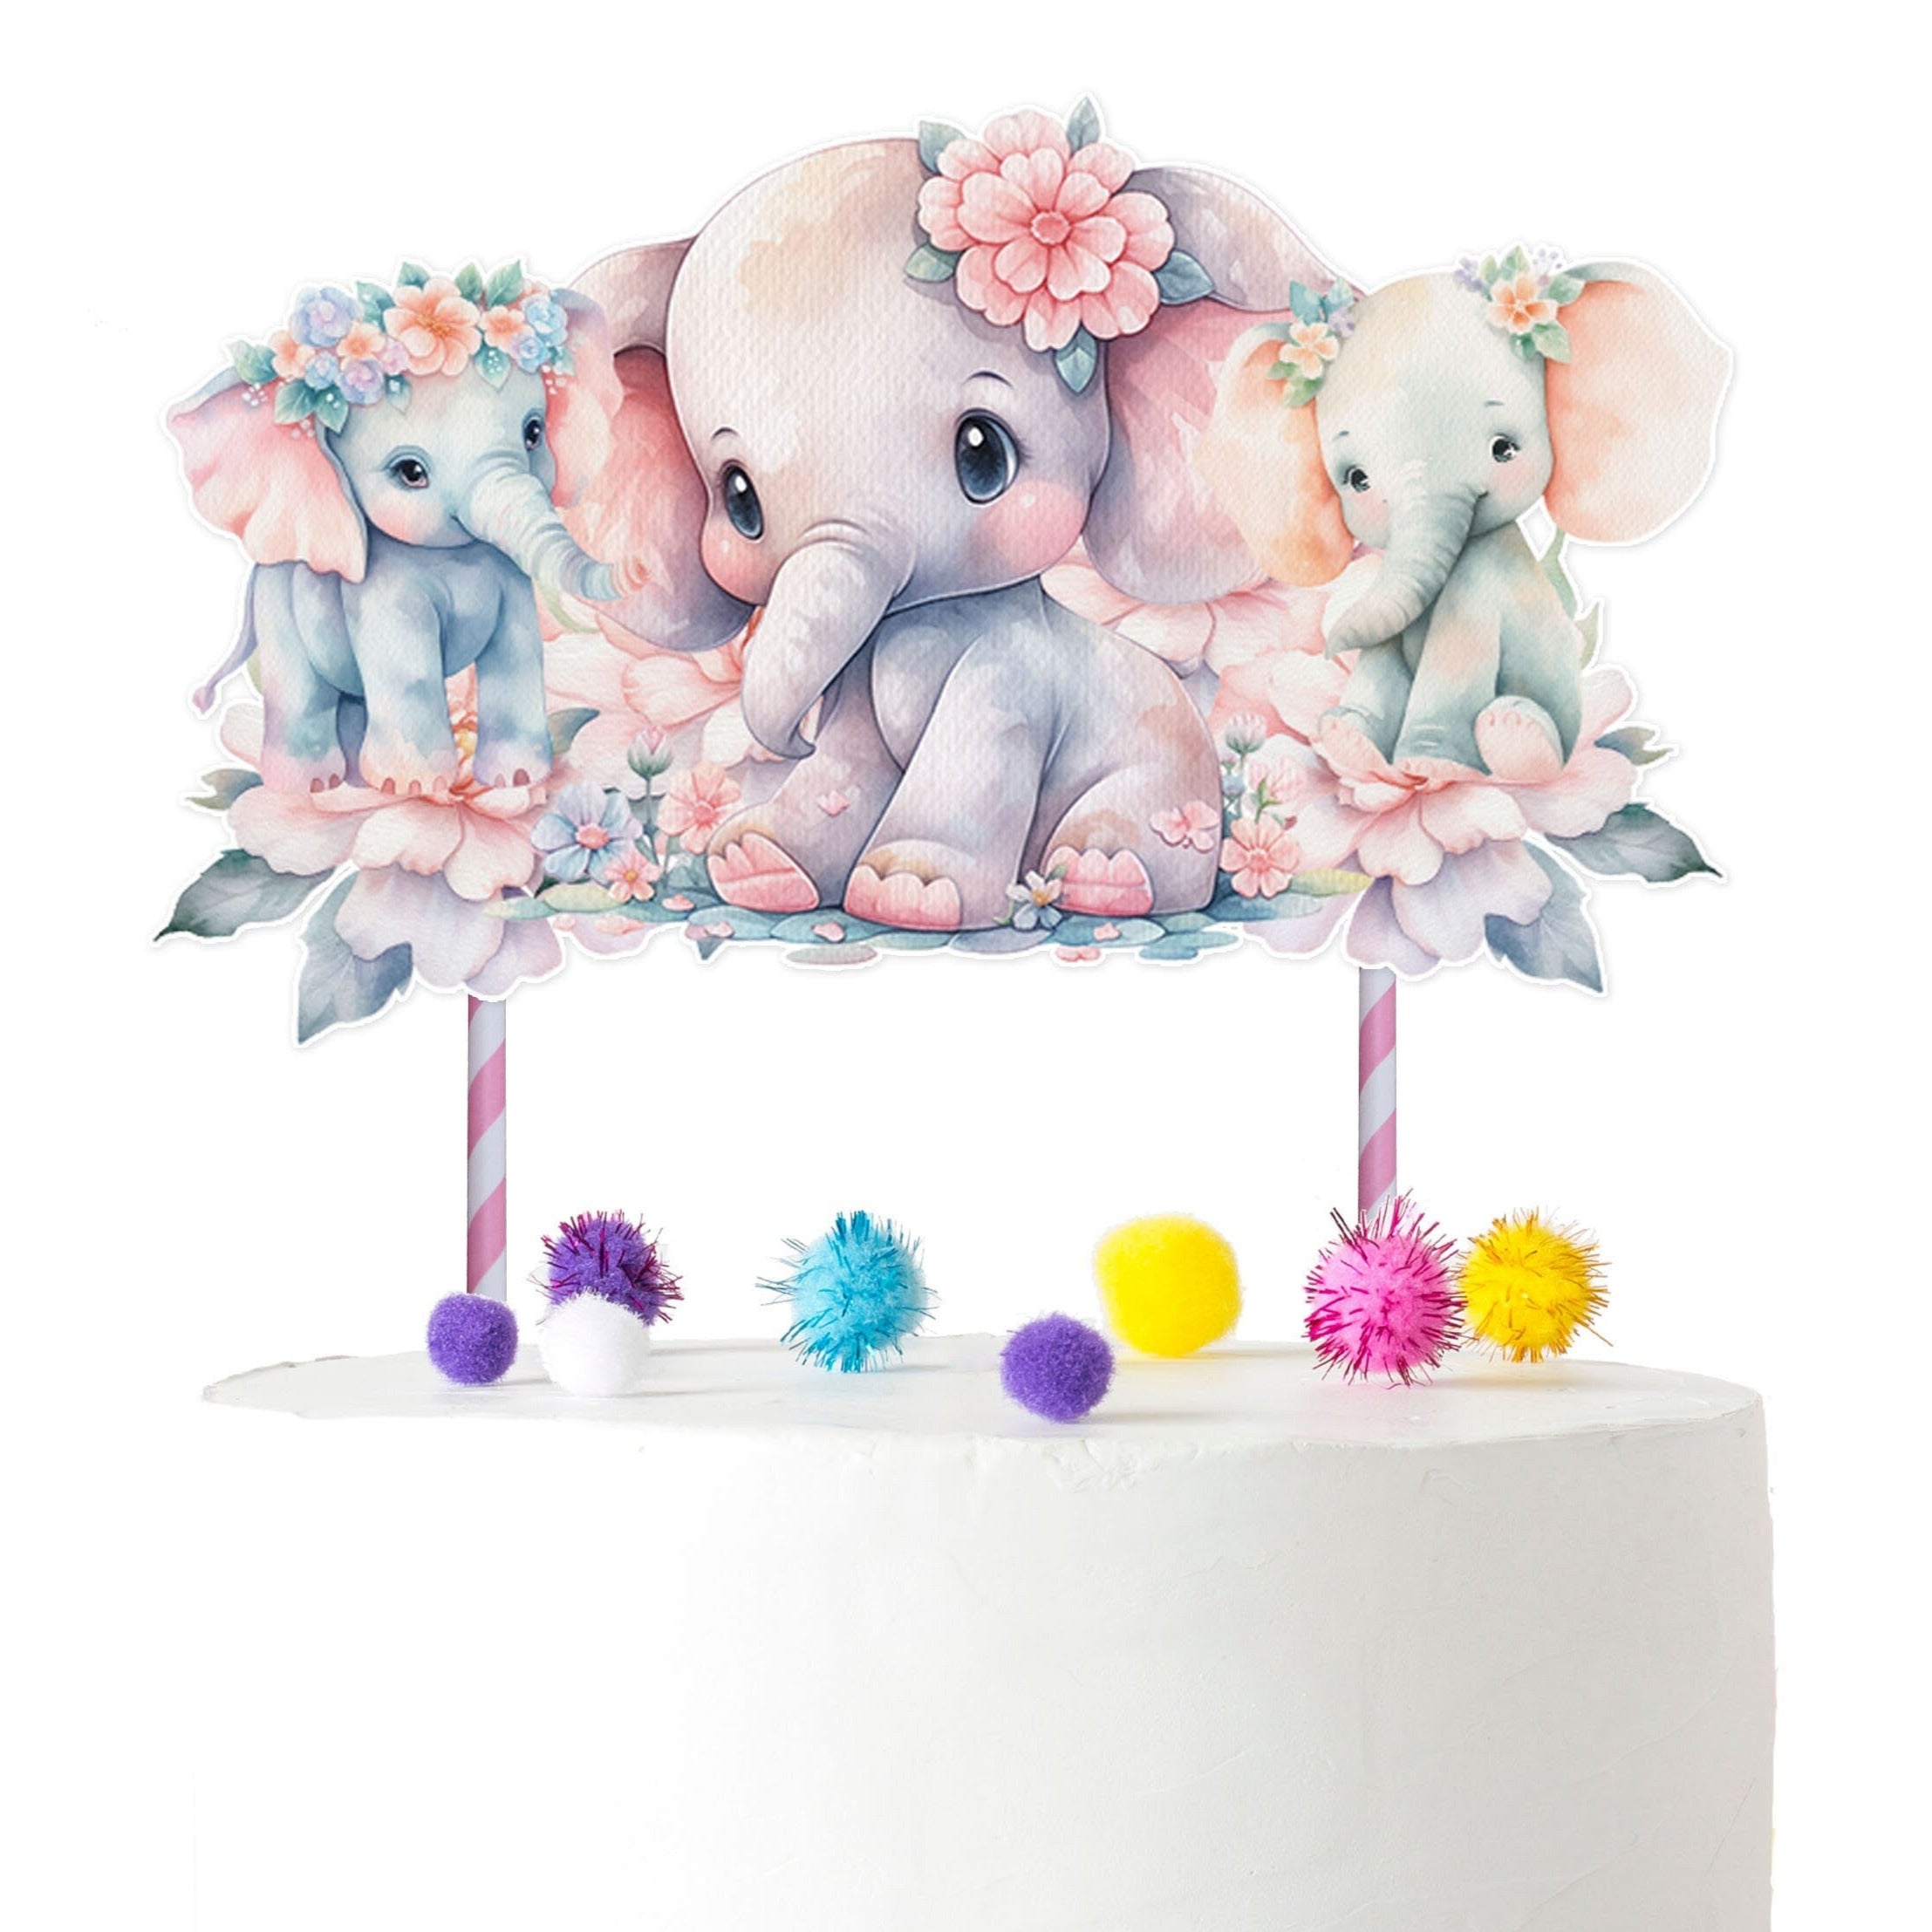 Adorable Elephant Cake Topper – Perfect for Baby Showers and Birthday Parties